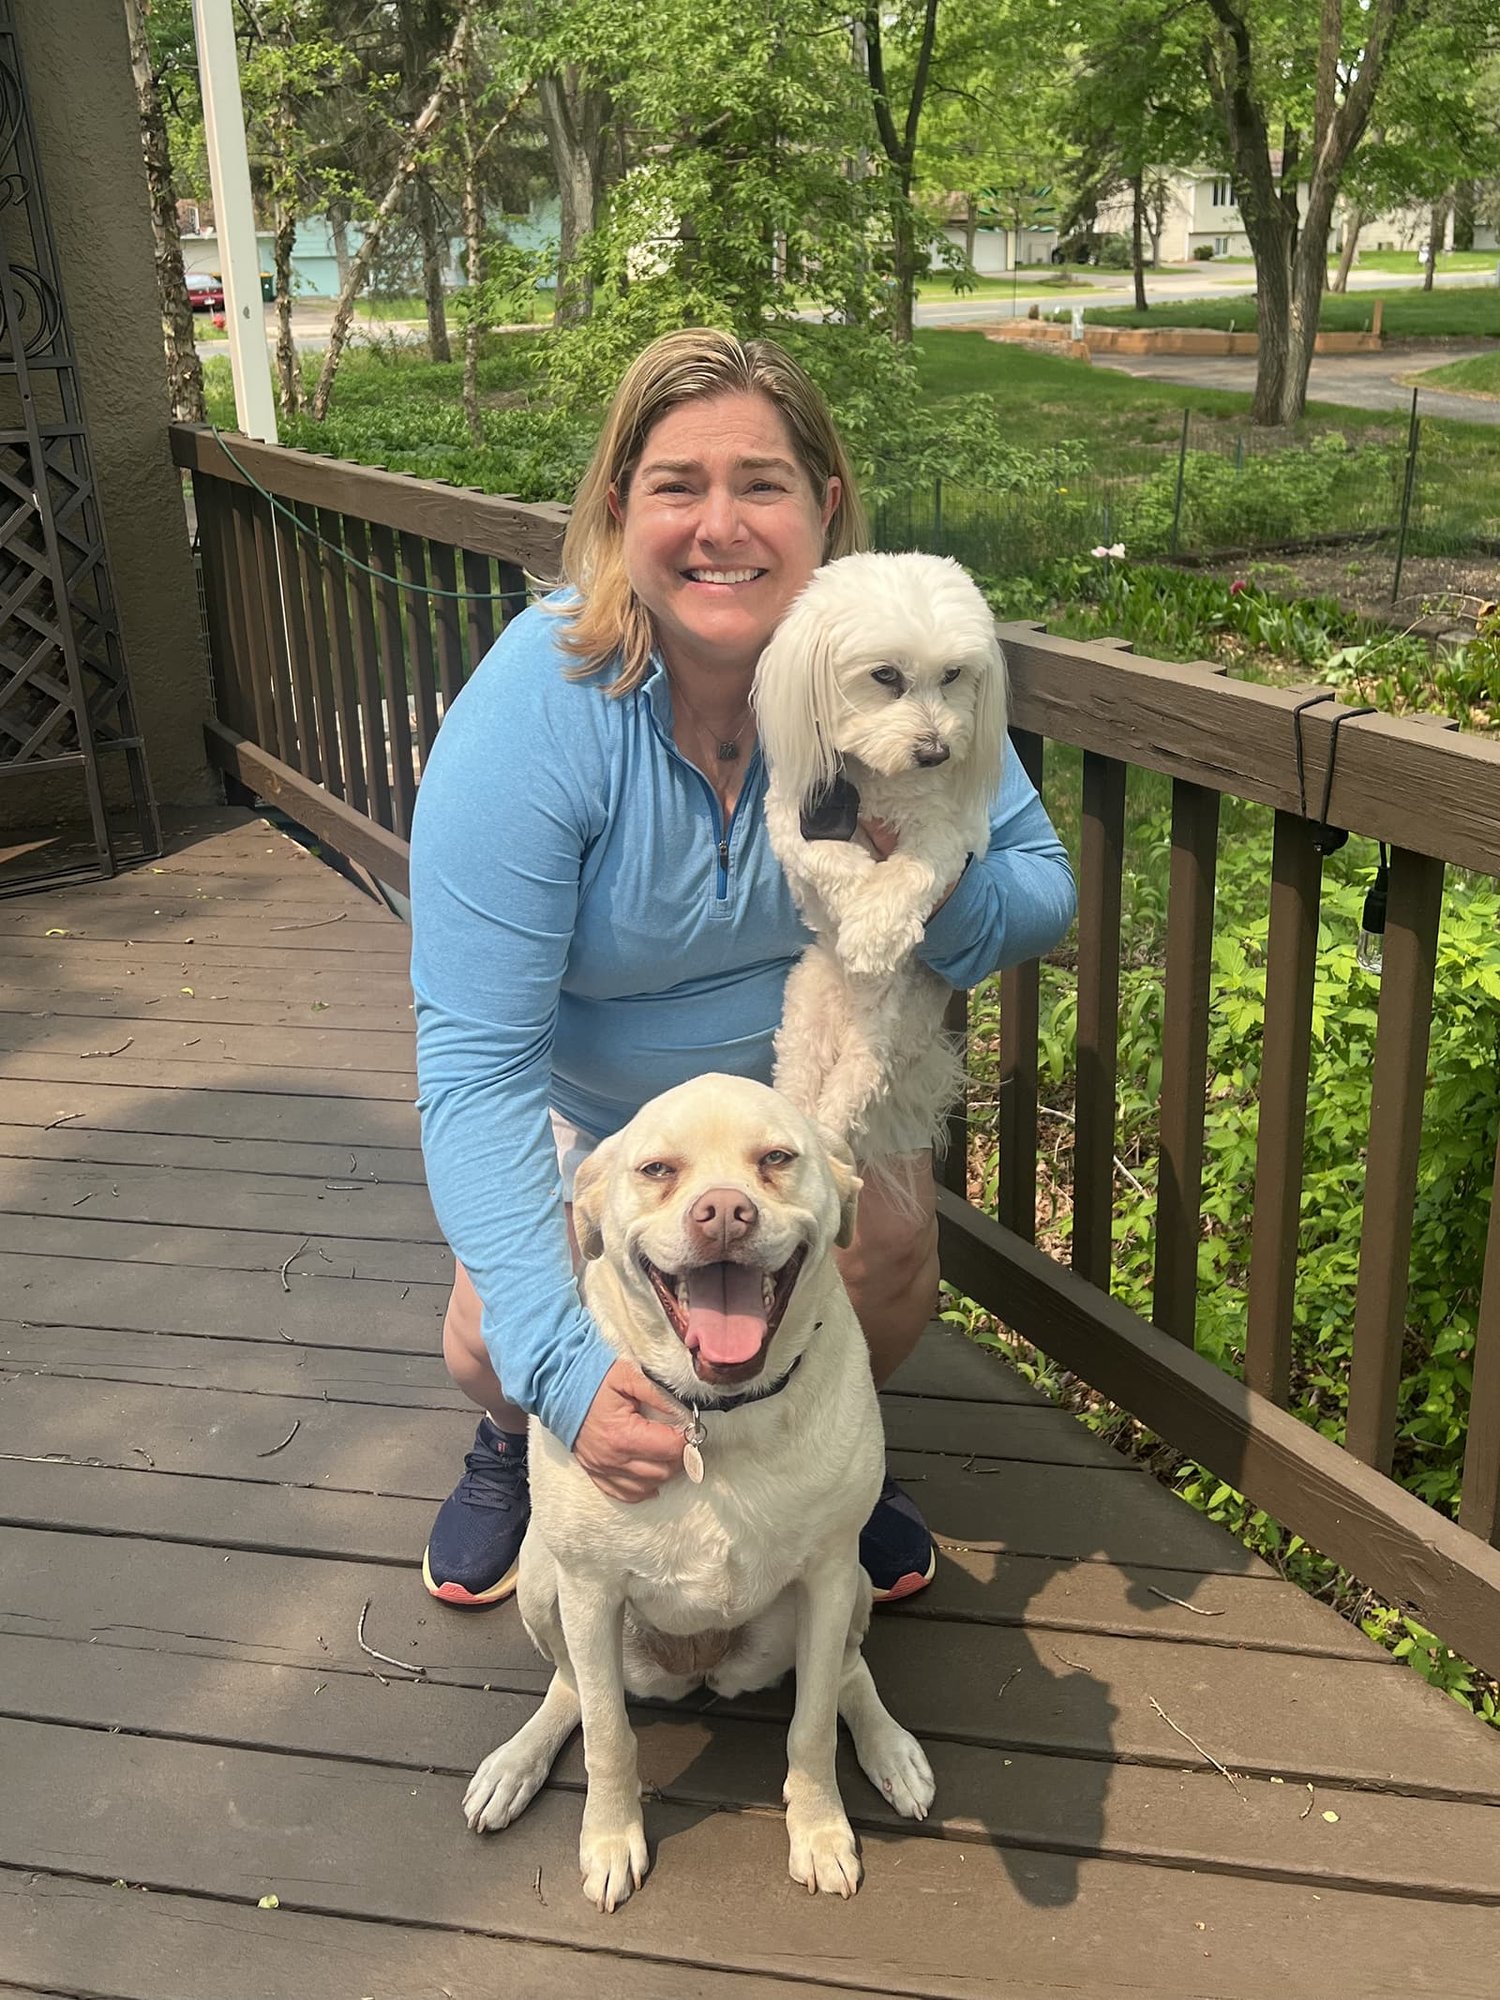 A.M sold her condo with the Berg Larsen Group team of realtors, here she is with her two dogs on a sunny day.